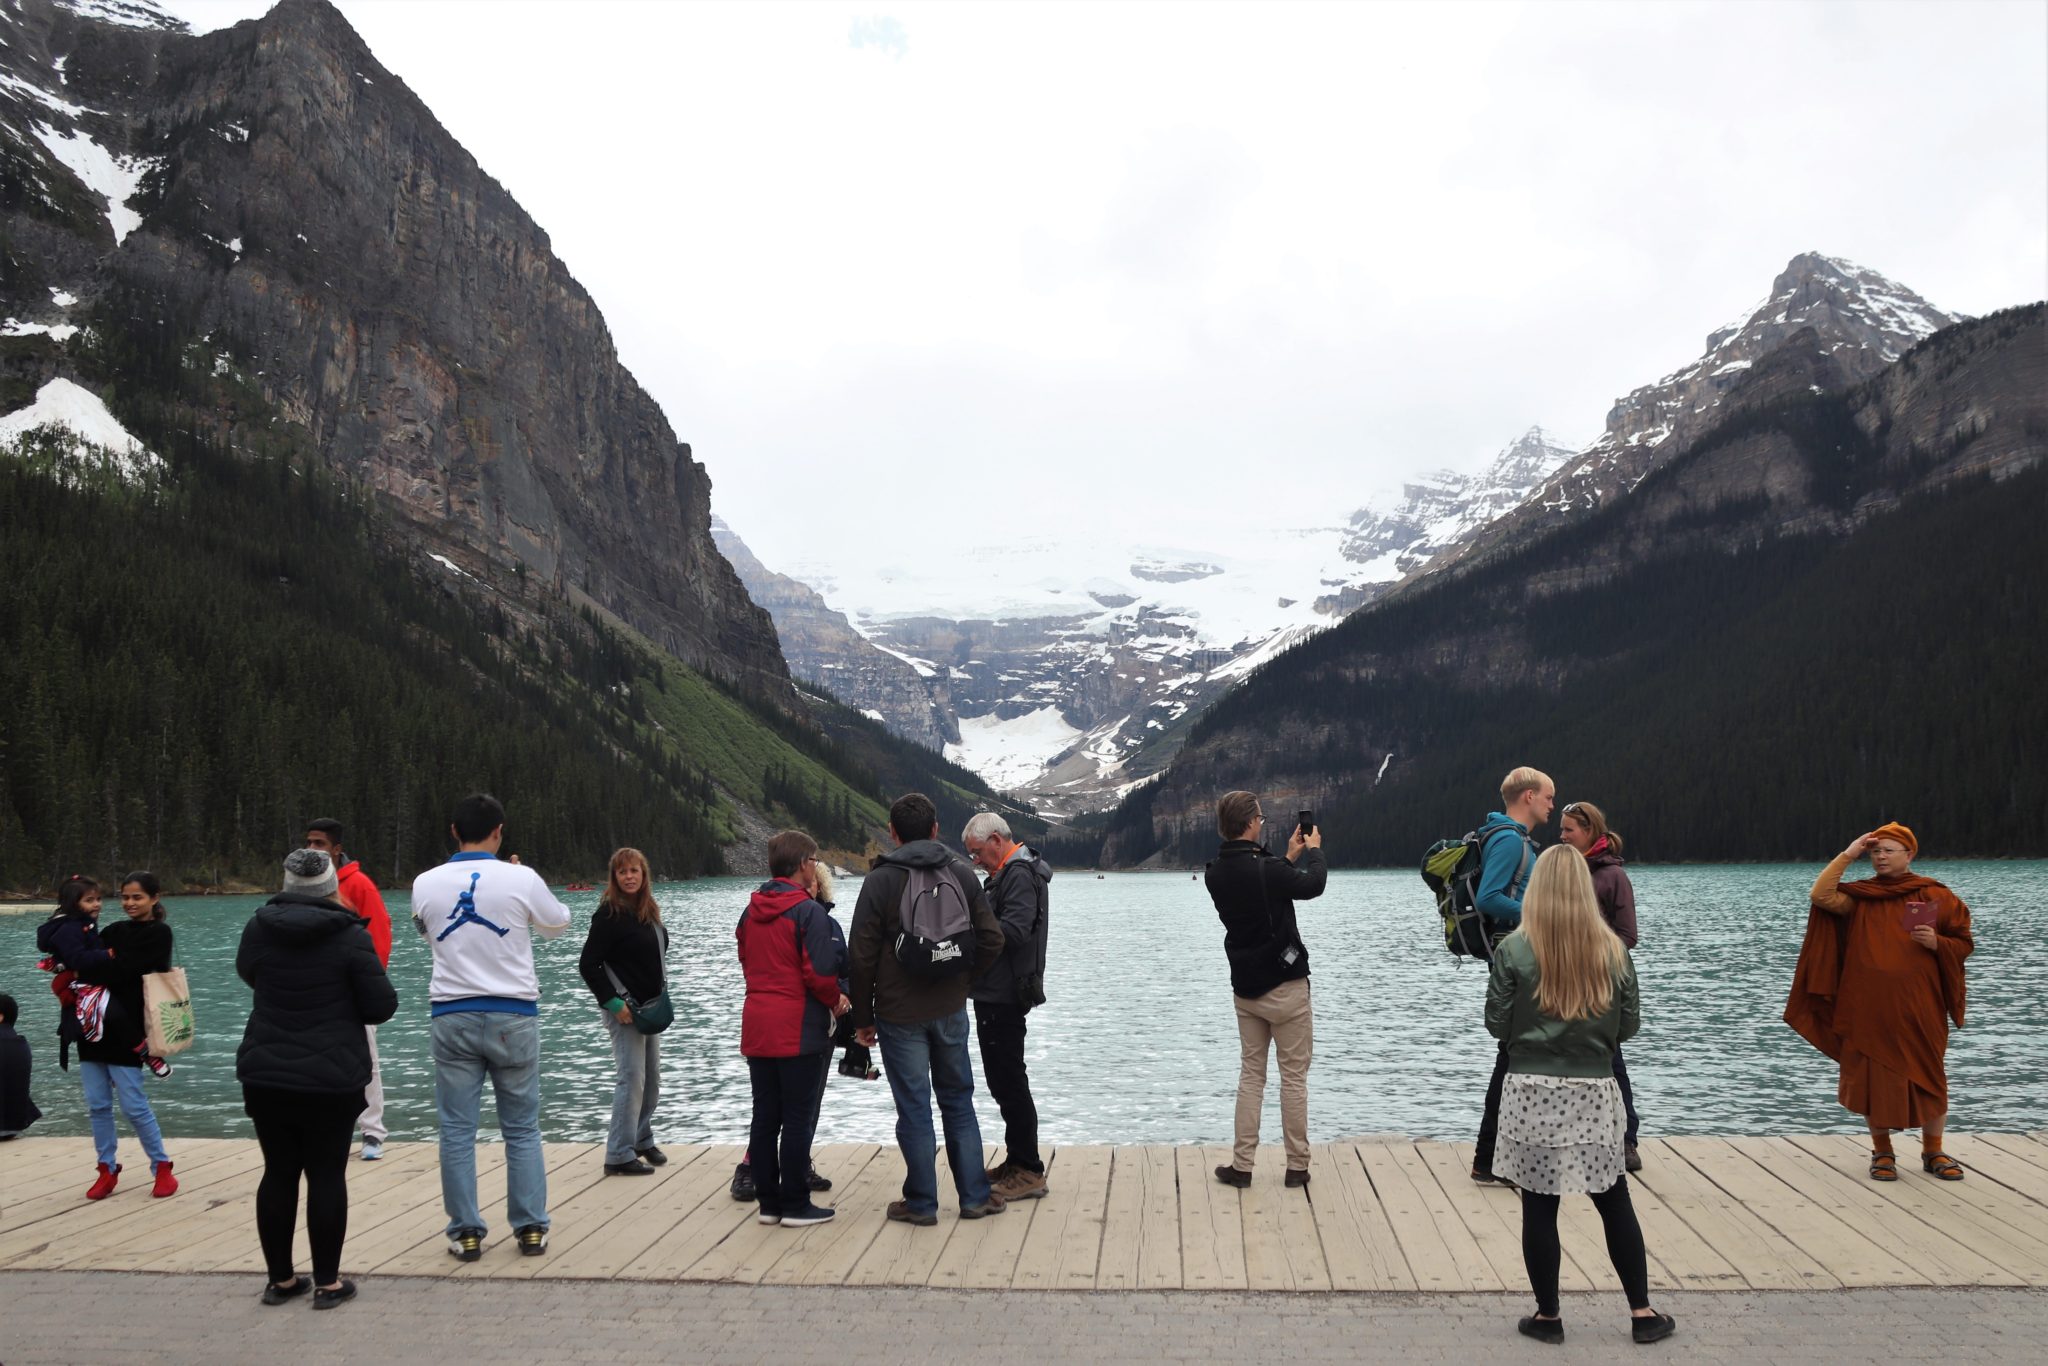 Tips for taking photos at Lake Louise | Banff Photography Guide: 15 Amazing Spots to take Photos in Banff | Simply Wander #banff #canada #simplywander #lakelouise